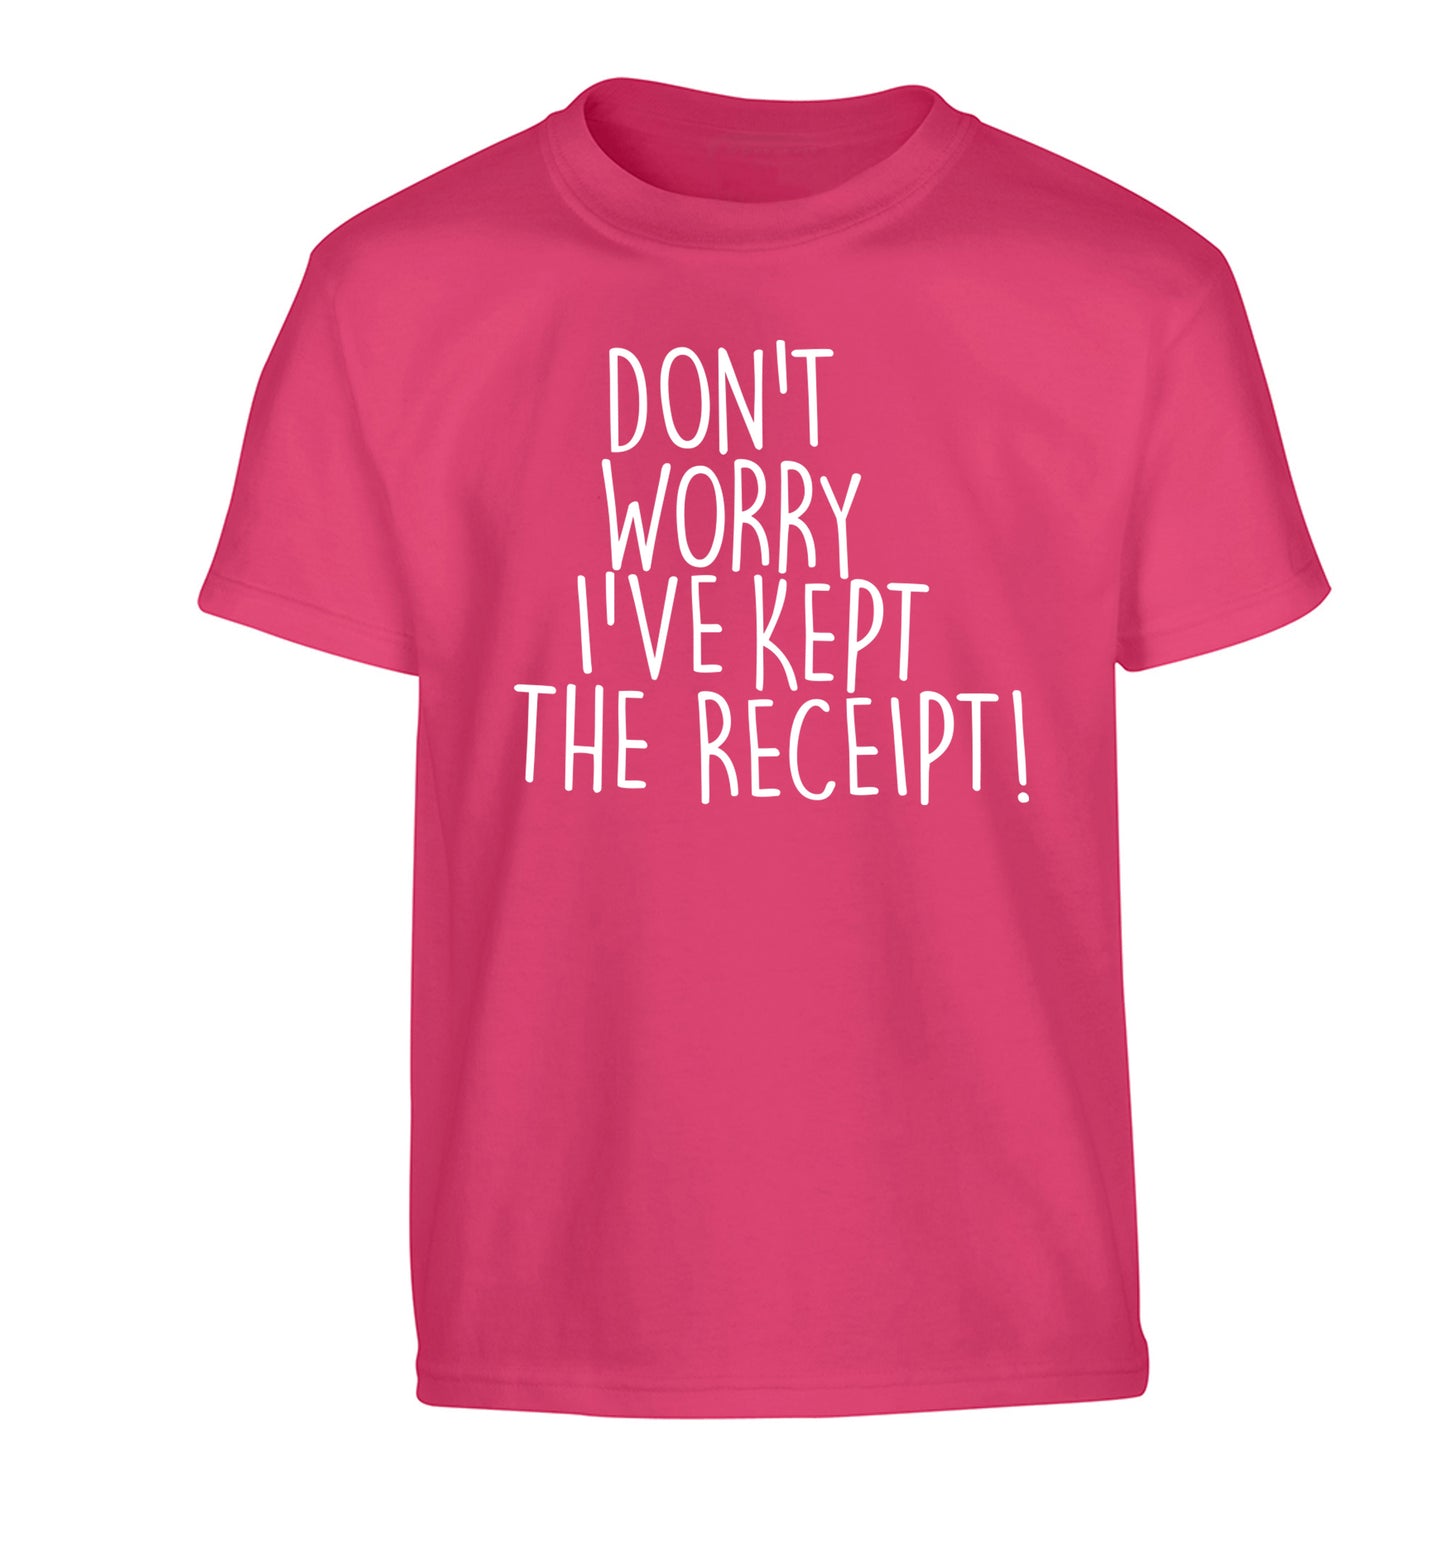 Don't Worry I've Kept the Receipt Children's pink Tshirt 12-13 Years